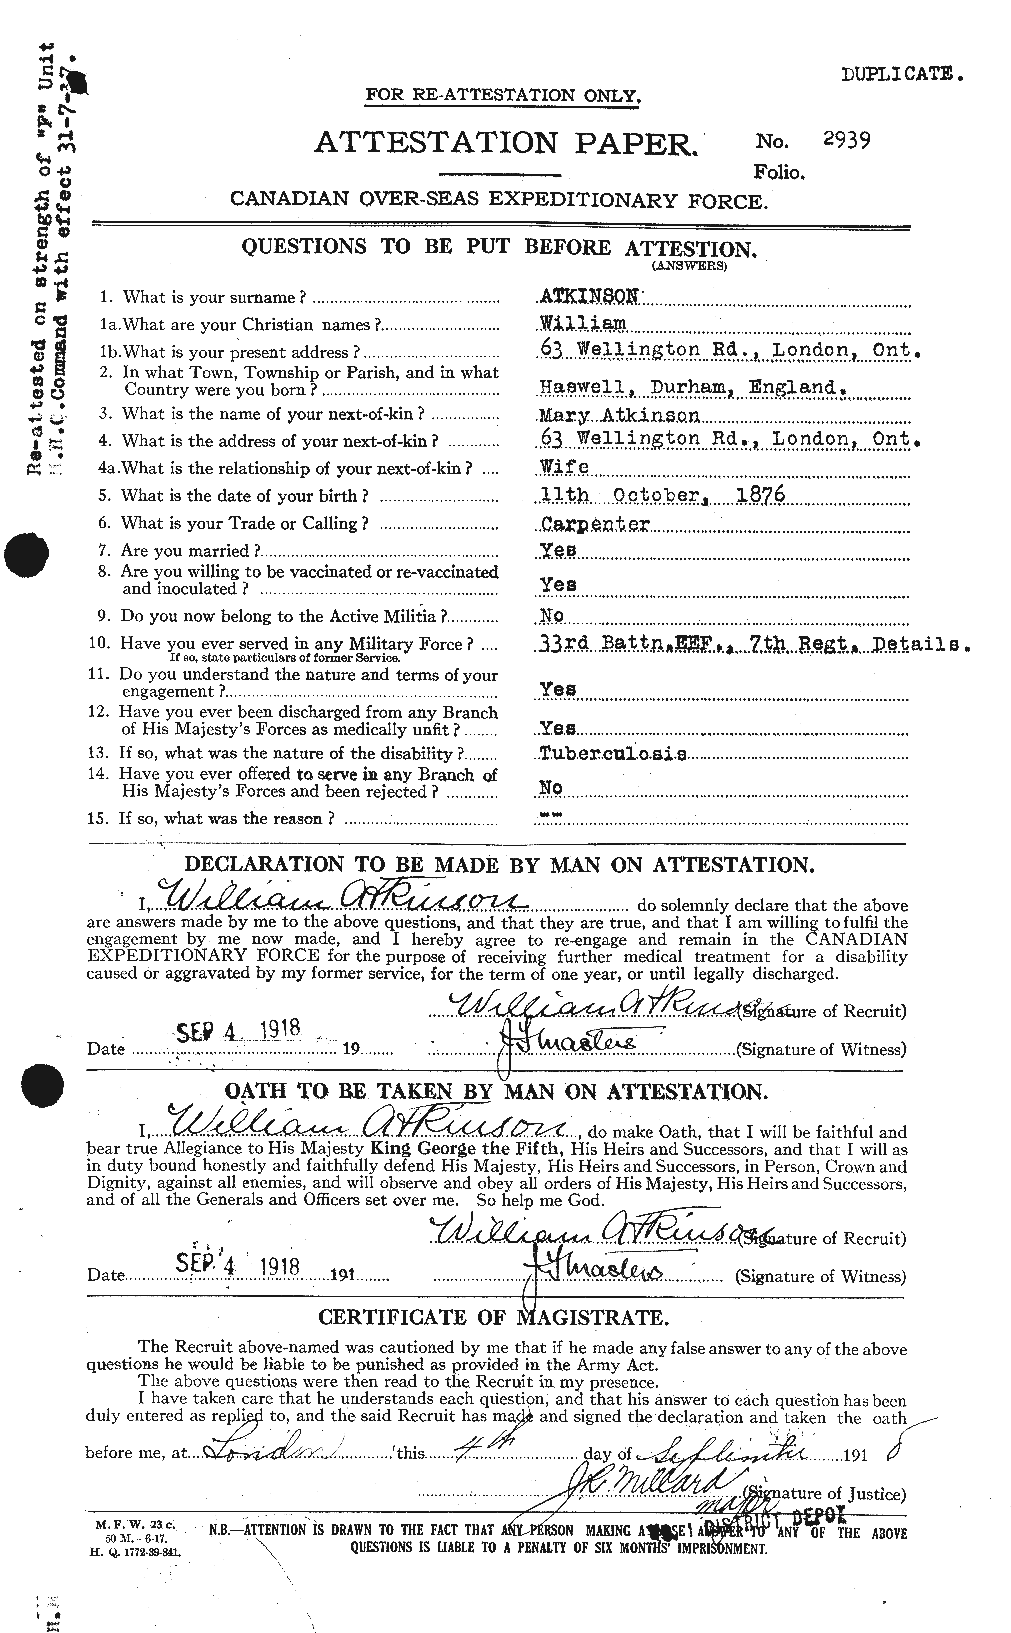 Personnel Records of the First World War - CEF 224205a